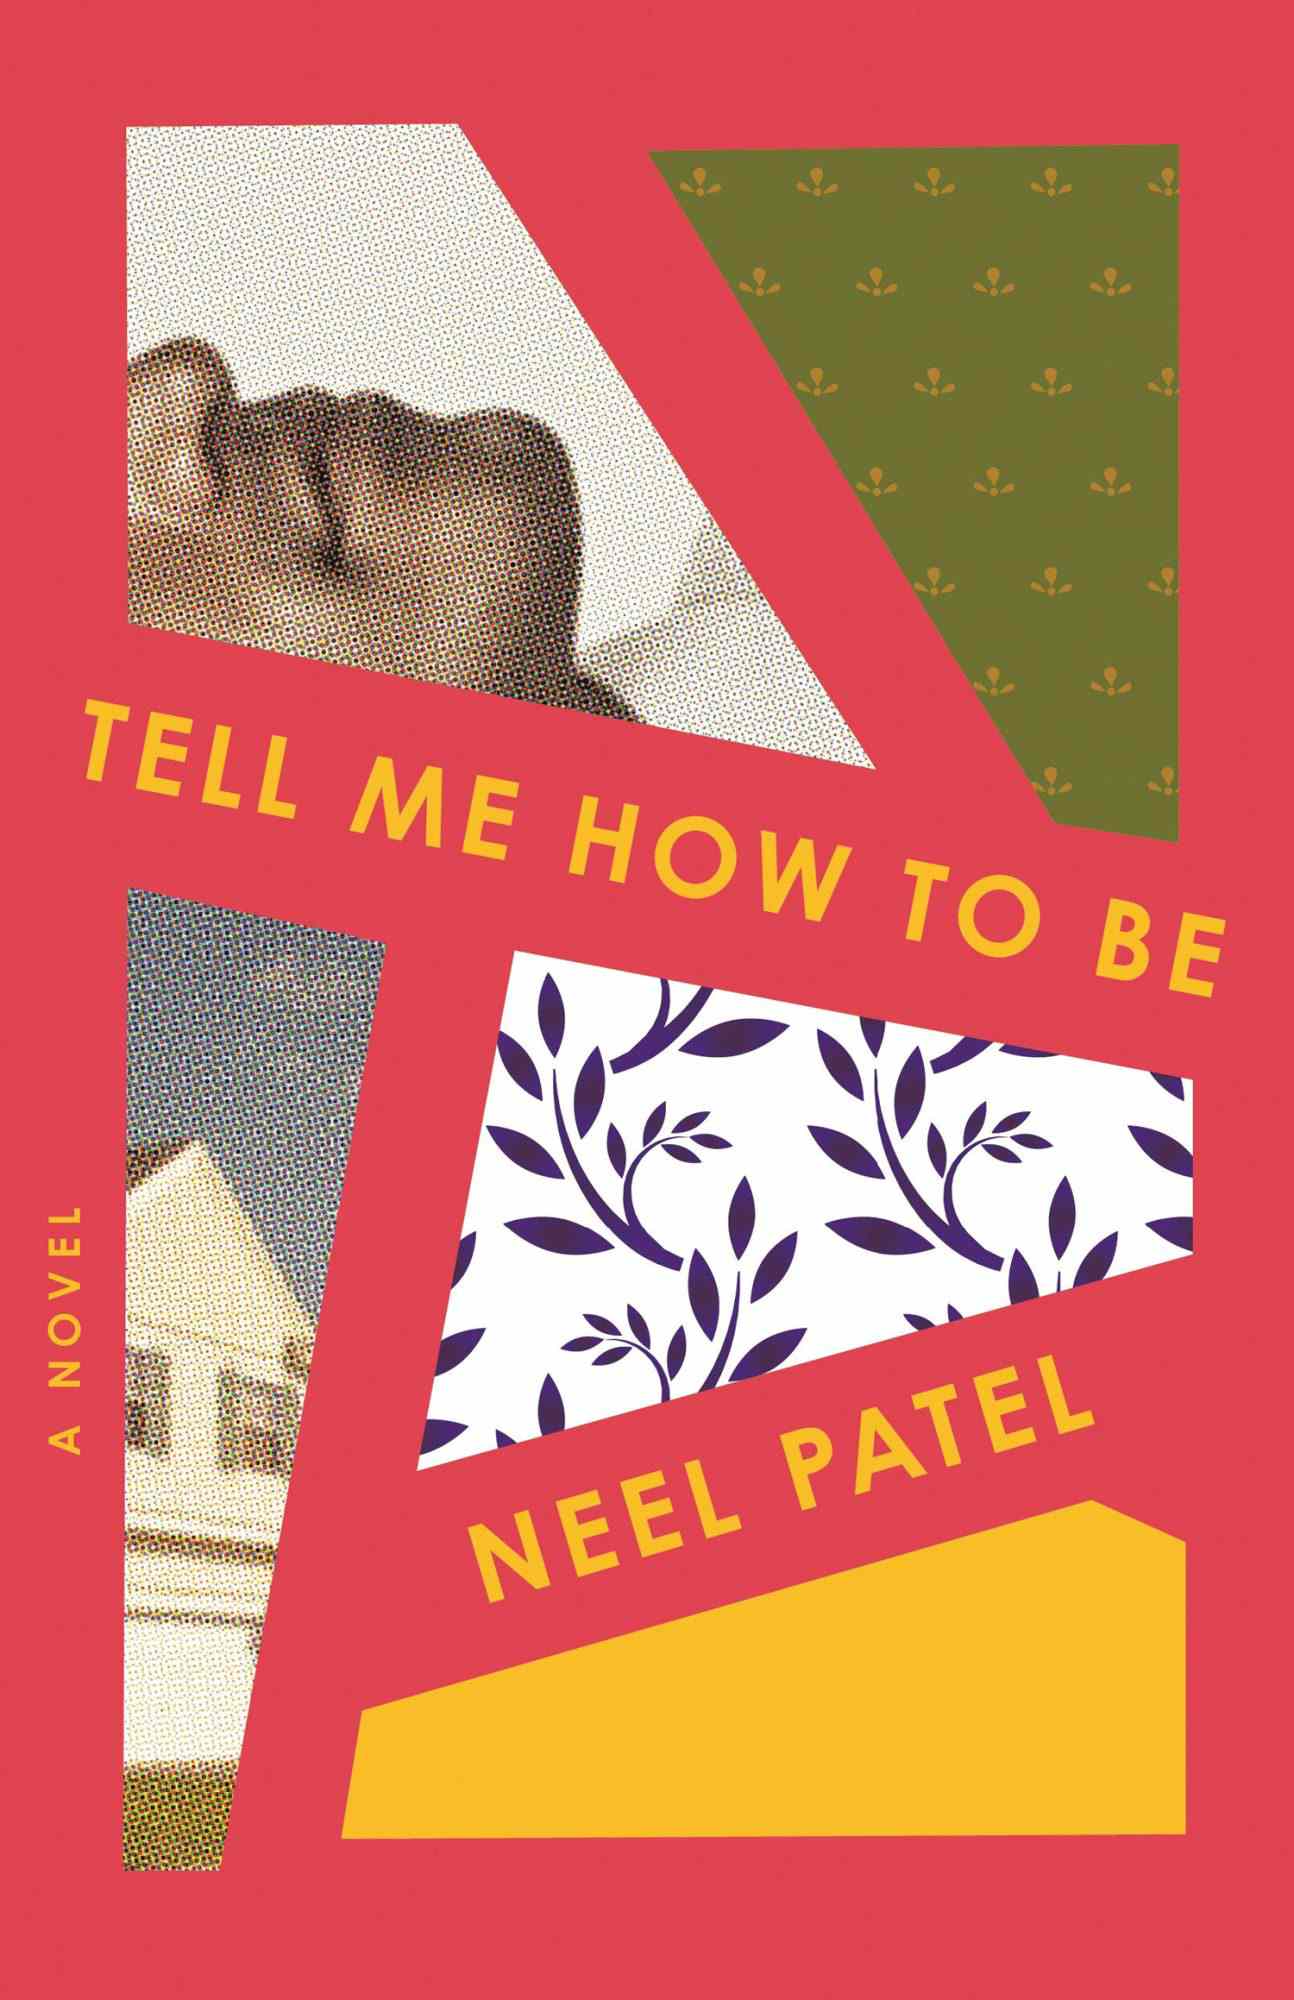 Tell Me How to Be: A Novel by Neel Patel